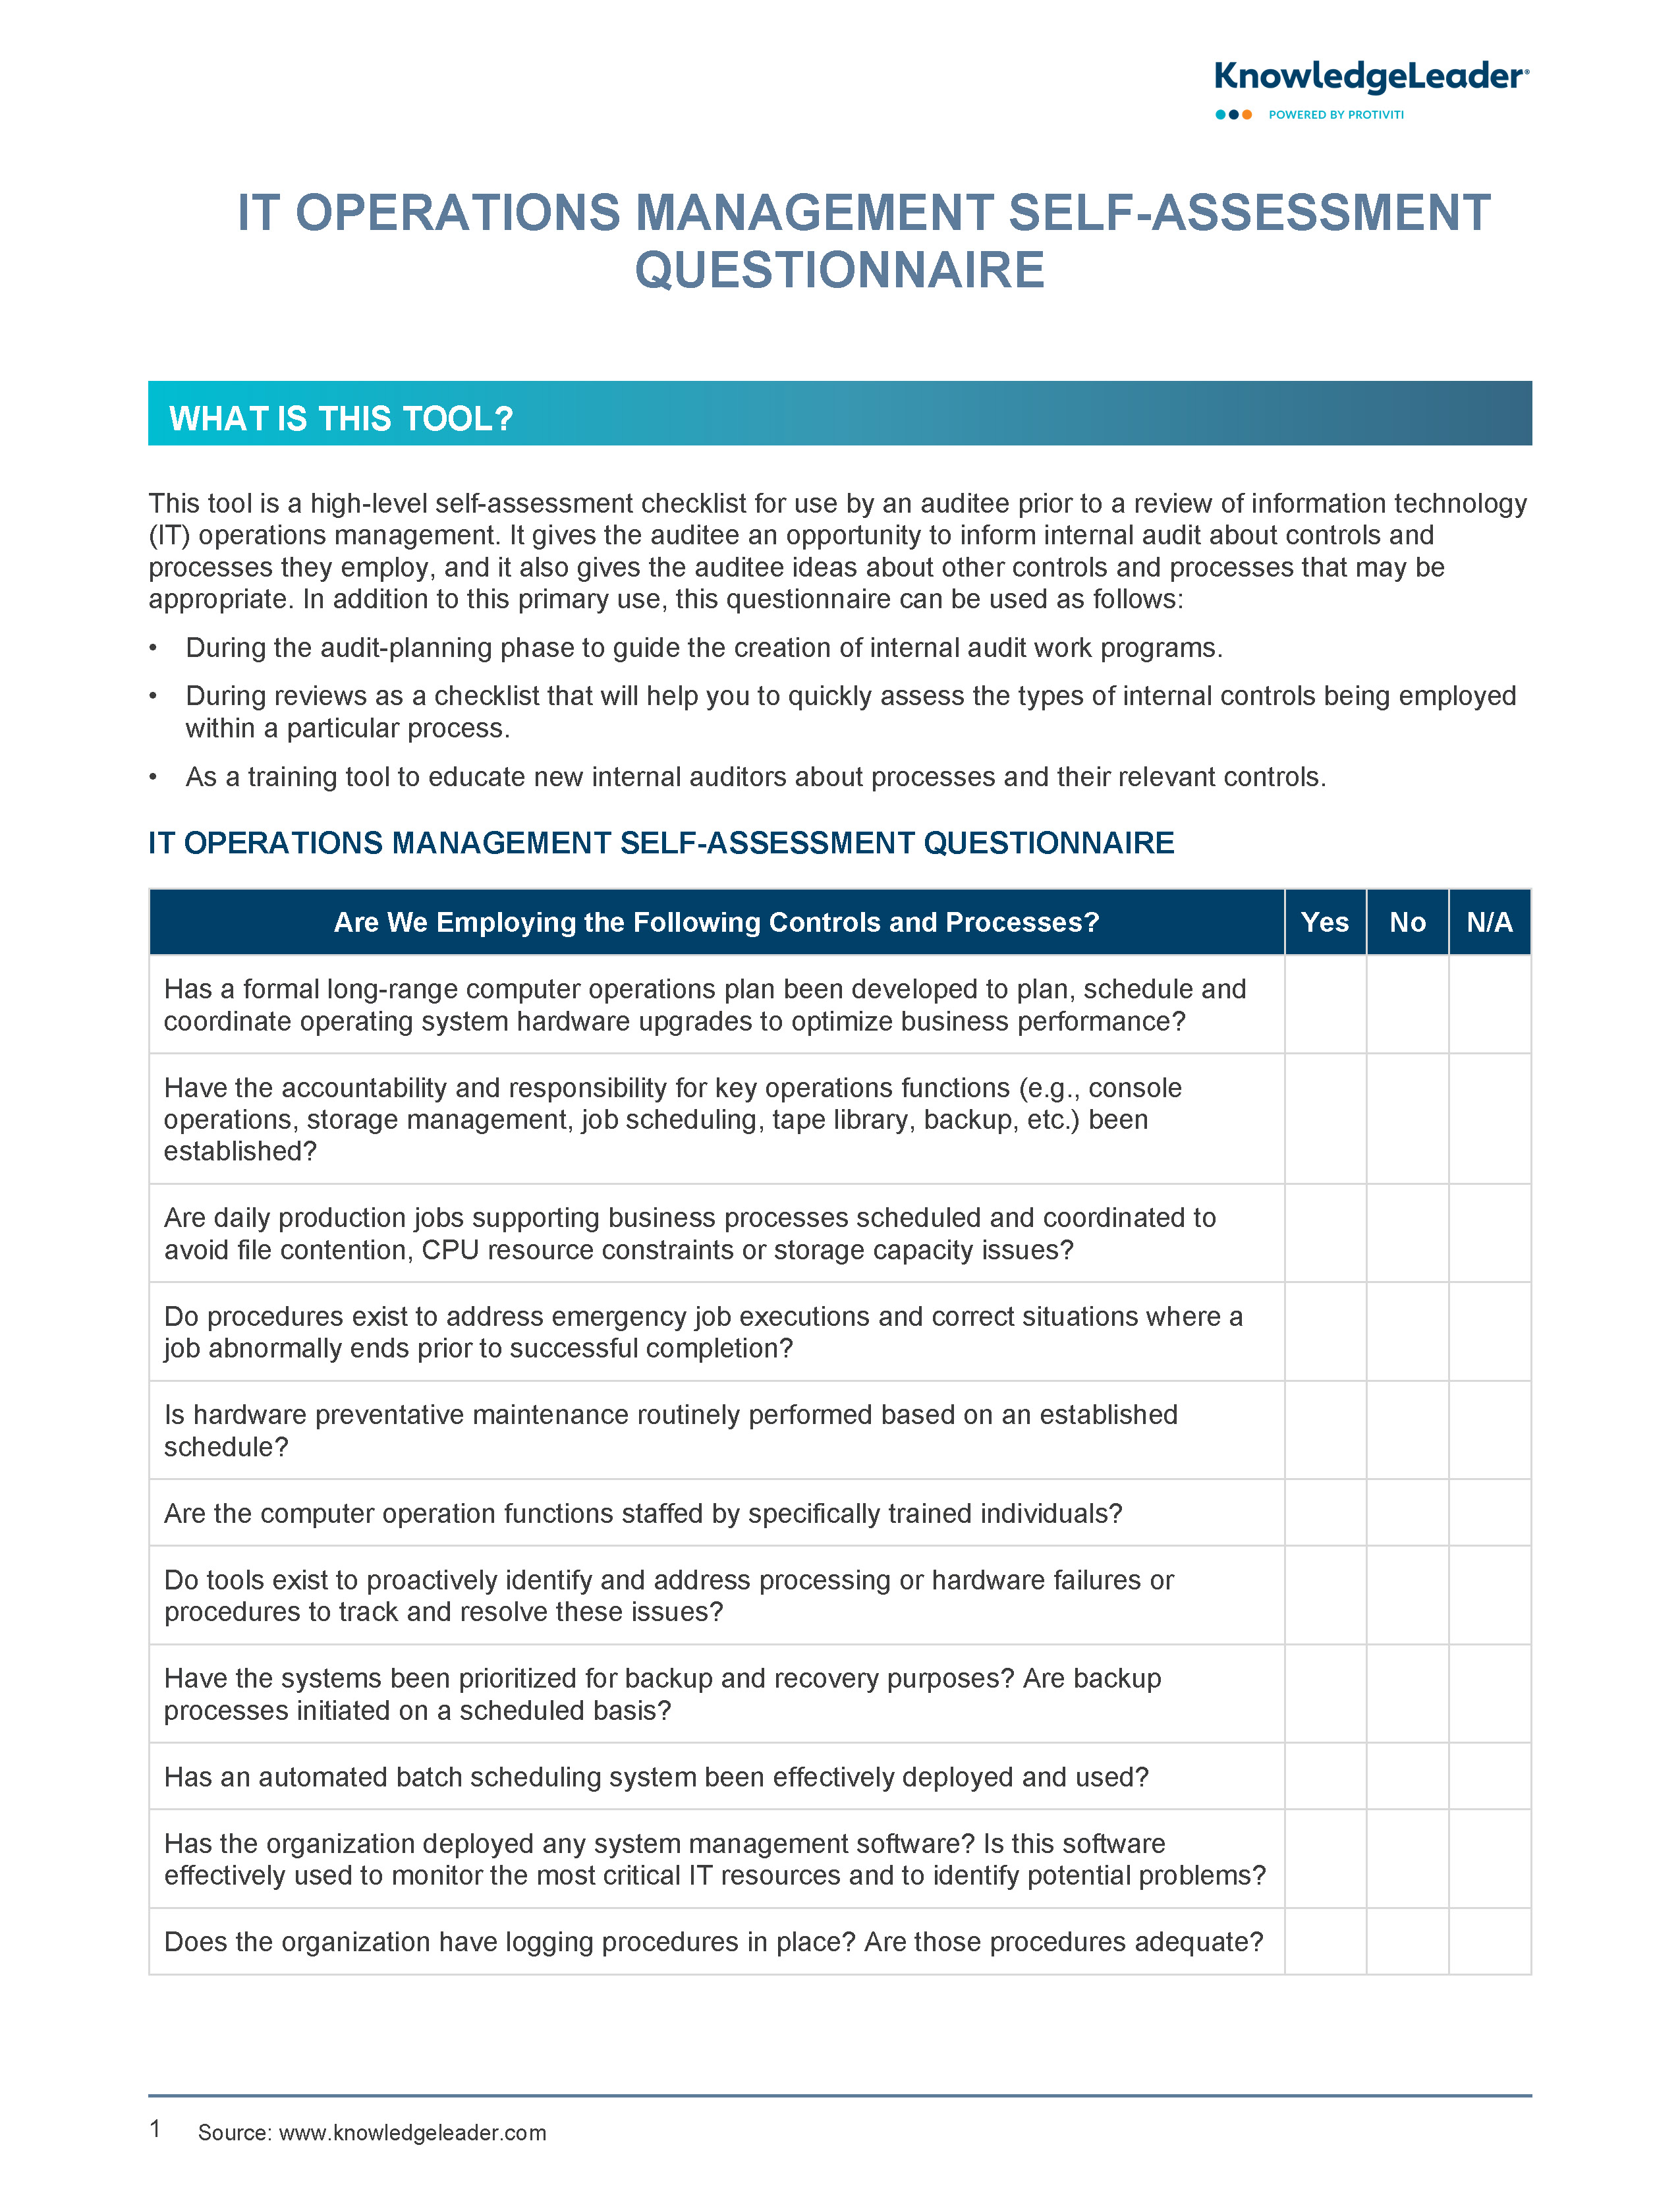 Screenshot of the first page of IT Operations Management Self Assessment Questionnaire